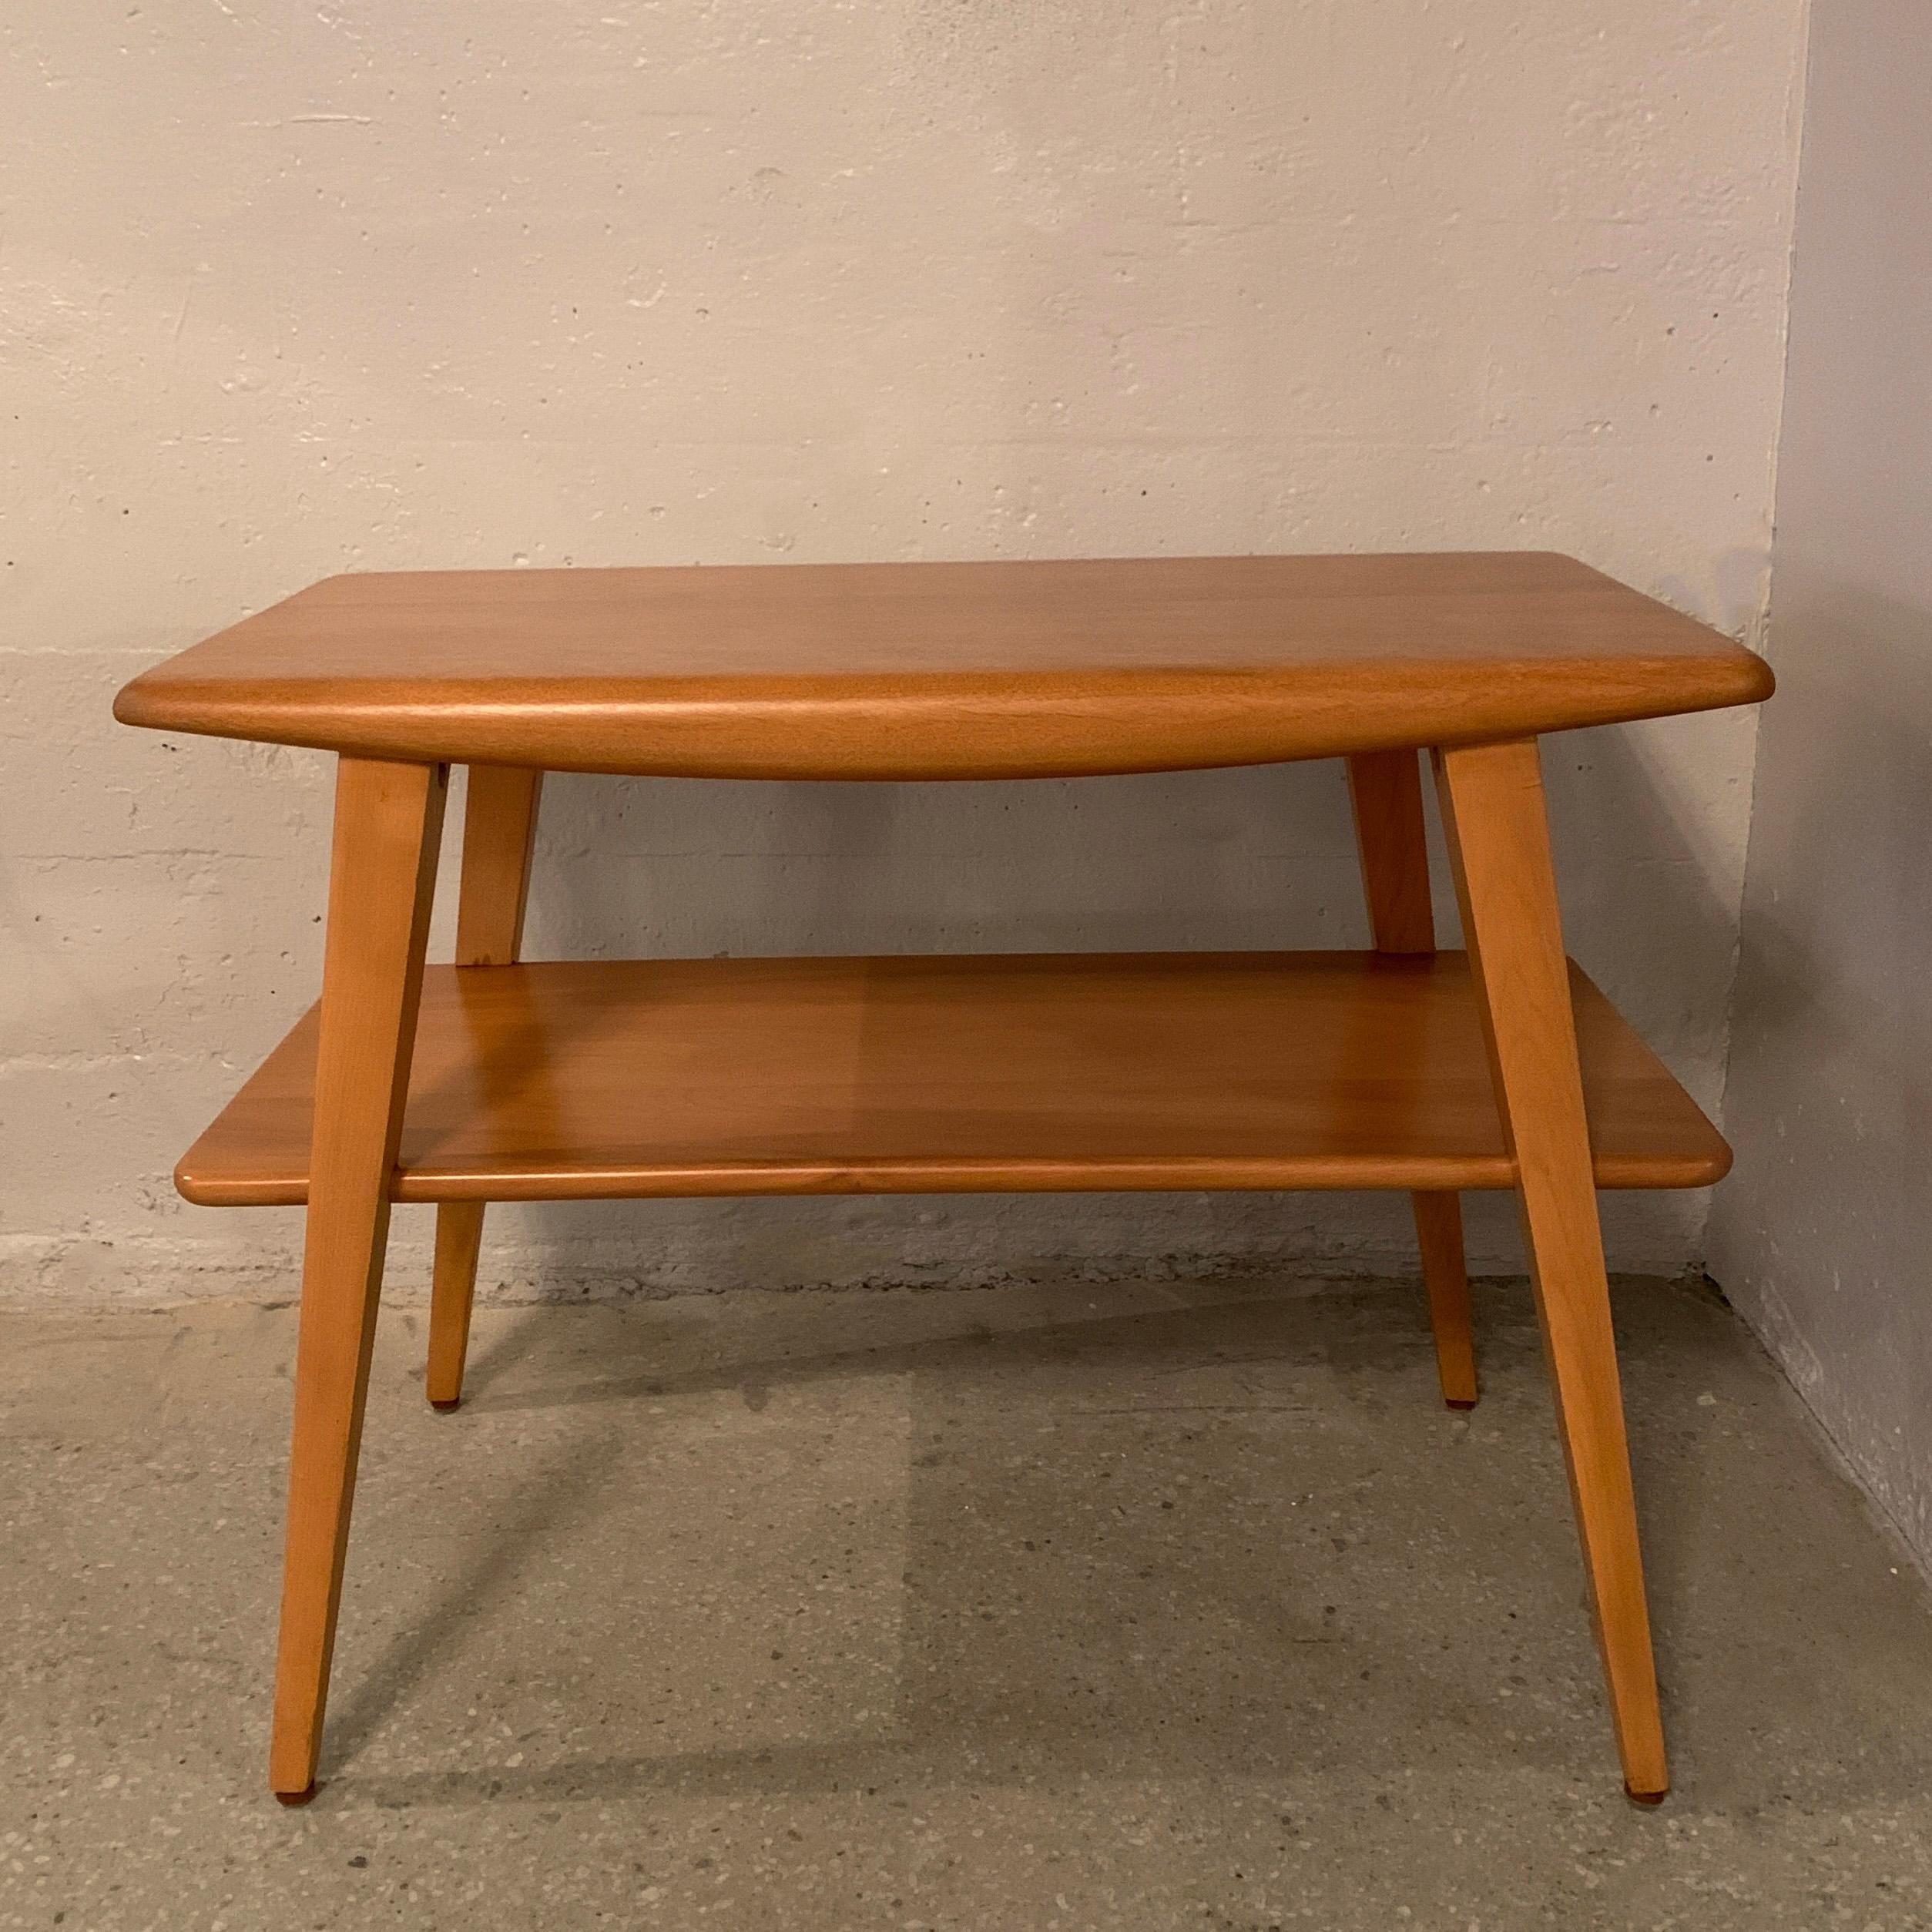 Classic, Mid-Century Modern, tiered birch side table by Heywood Wakefield Co. features a lower tier at 12 inches height.